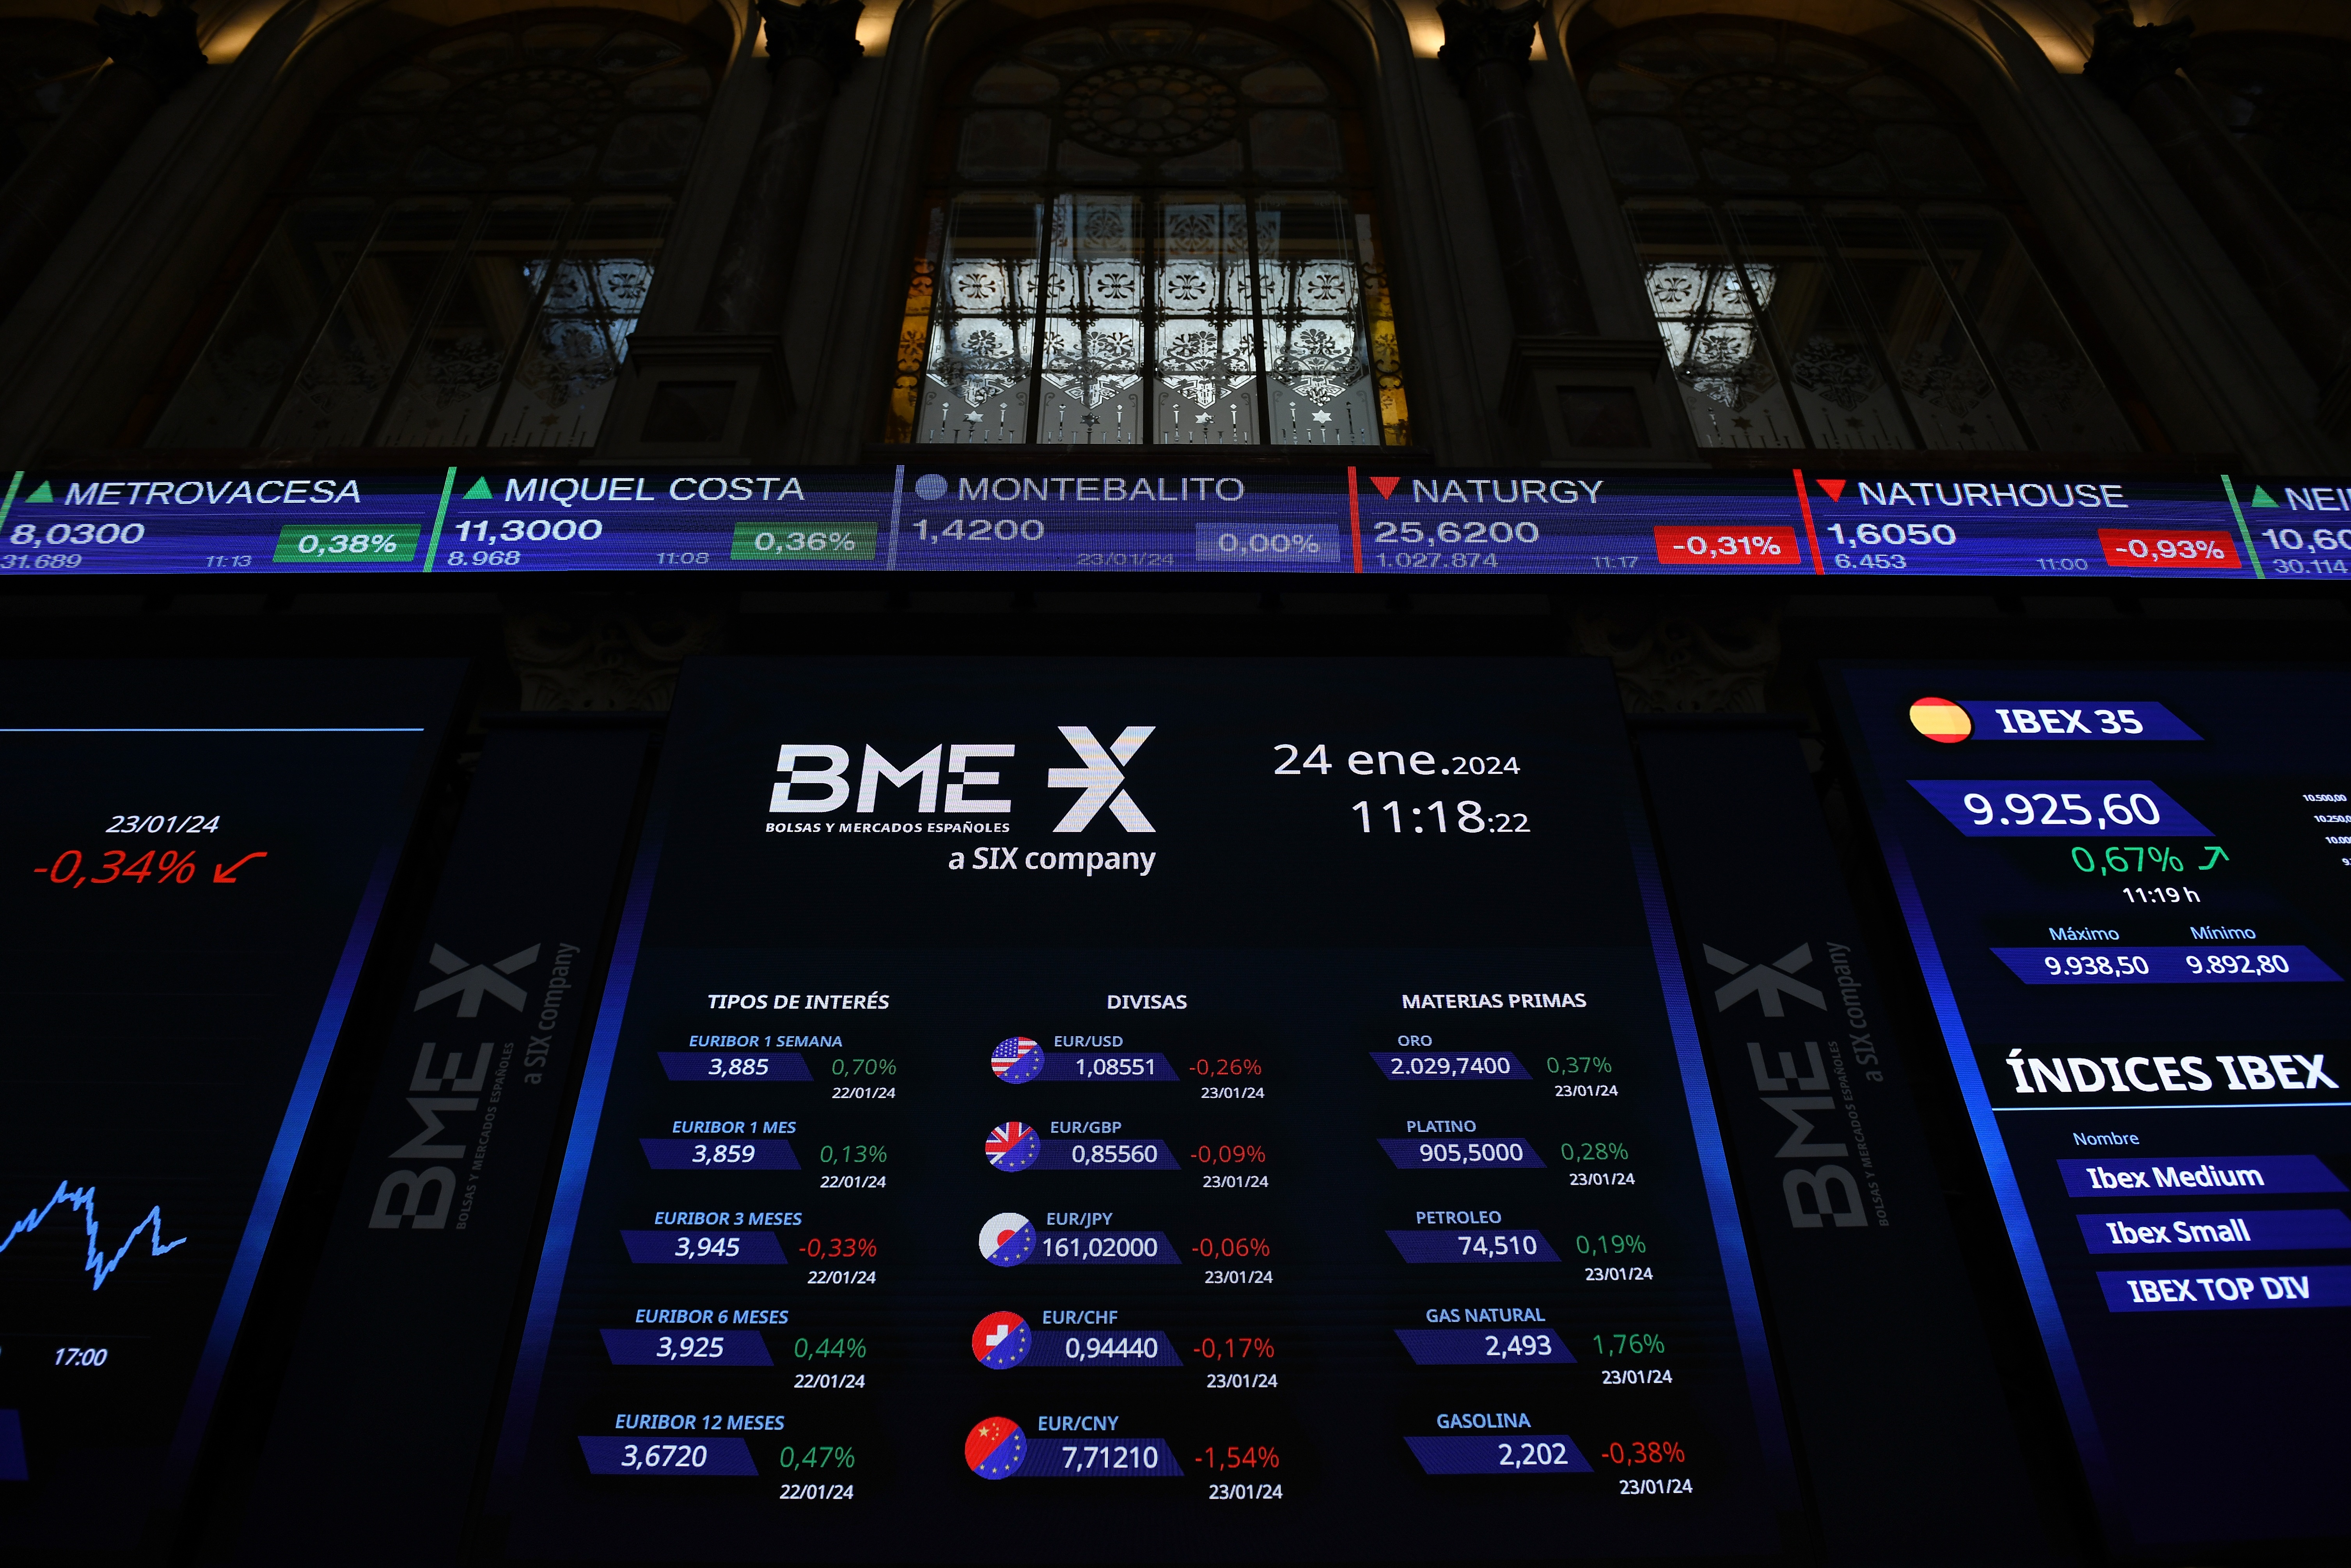 Ibex 35 panel in the Madrid Stock Exchange Palace.